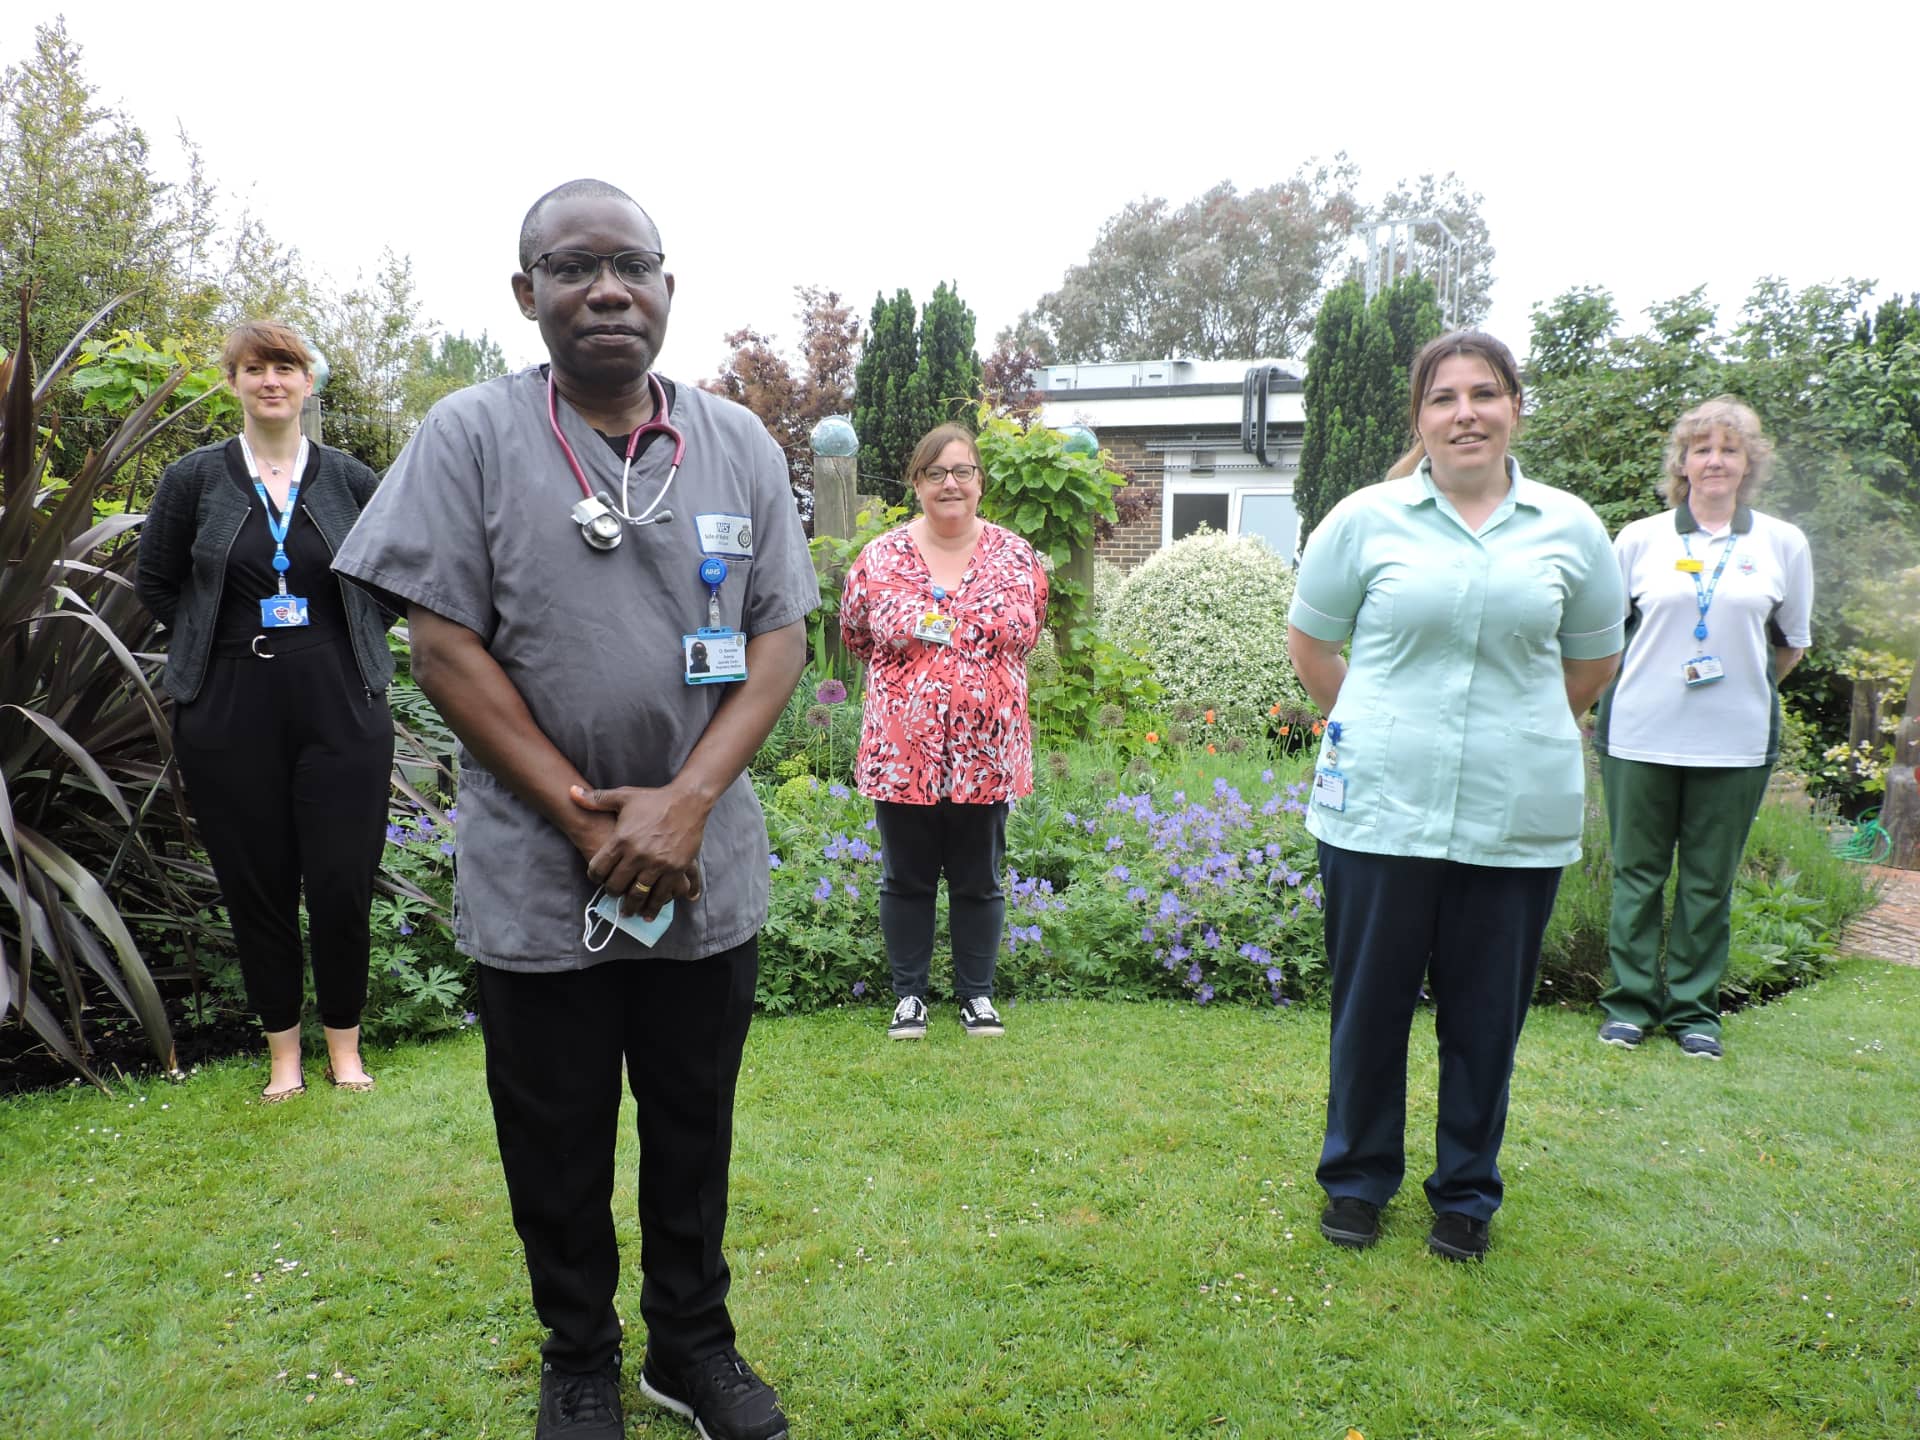 Front: Dr ADENIYI, Kirsty Large Long Covid administrator Back L to R: Dr Anna Garrett, Consultant Clinical Psychologist, Sarah Kearney, Lead Respiratory Clinical Nurse Specialist and Long Covid Lead, Maura Faulkner, Acute and Stroke Therapy Lead and Professional Lead For Occupational Therapy